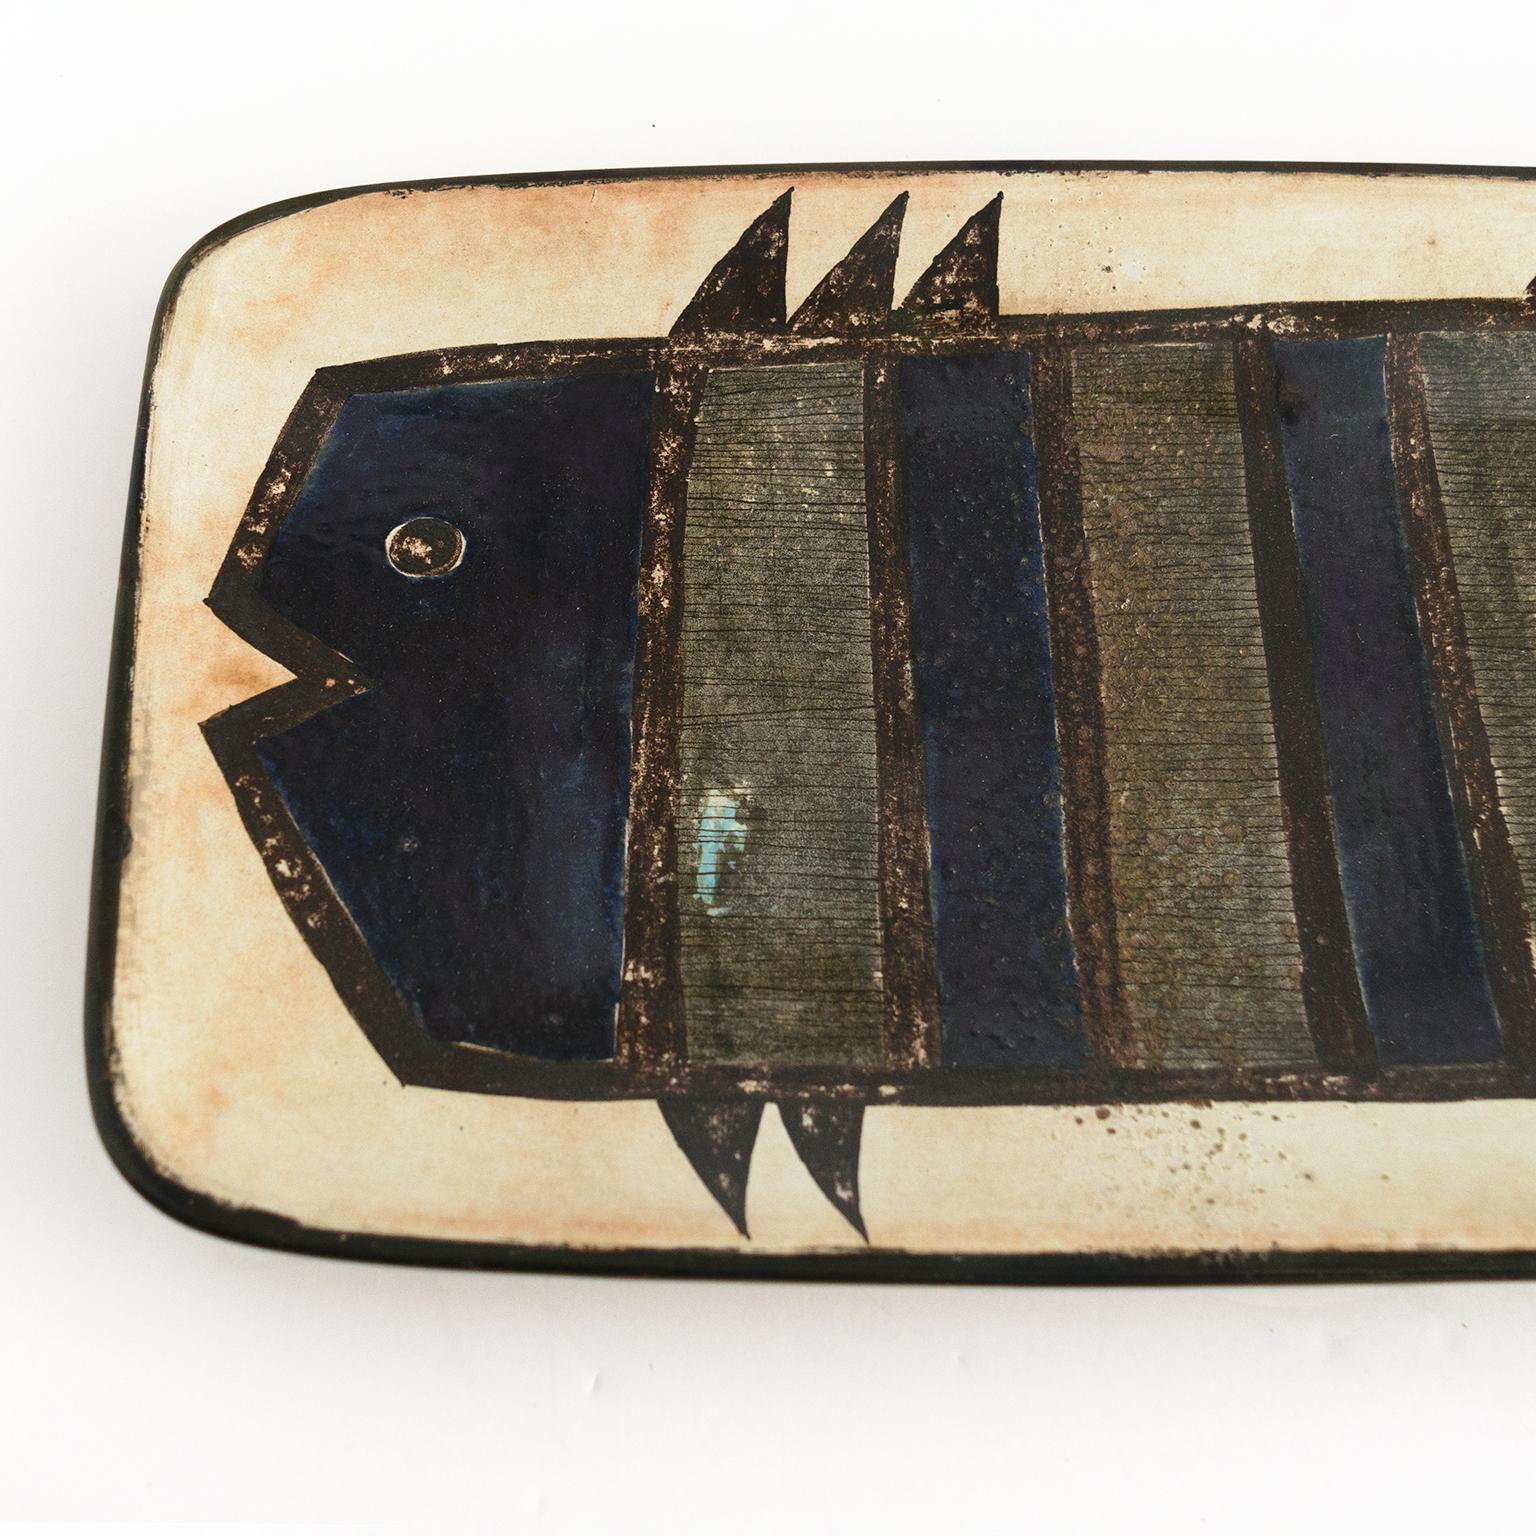 Scandinavian Modern ceramic serving plate with hand decorated striped fish. This dish is from a limited collaboration of Carl Harry Stålhane and Aune Laukkanen for Rörstrand ca. 1950’s. 

Measures: Length: 18“ width: 10“ height: 2“.